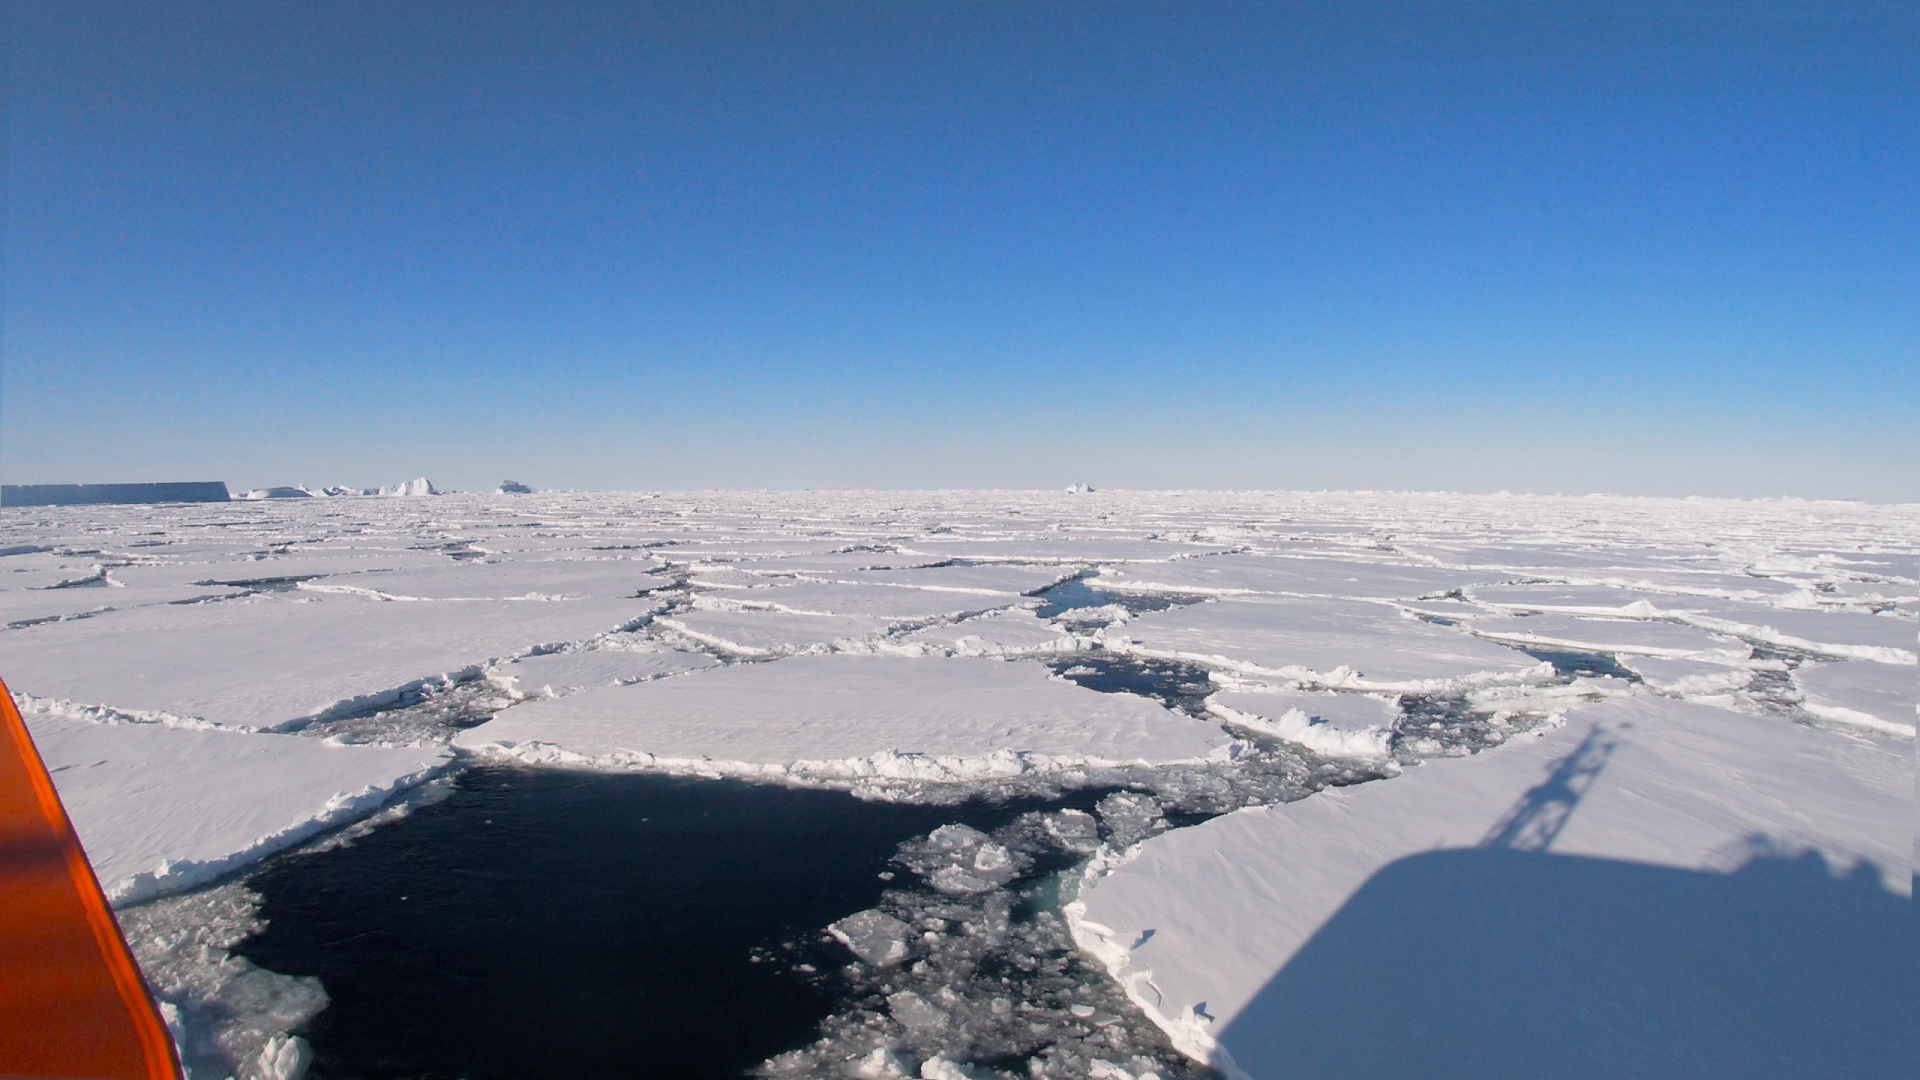 A view of Antarctic ice sheets on a blue sky day